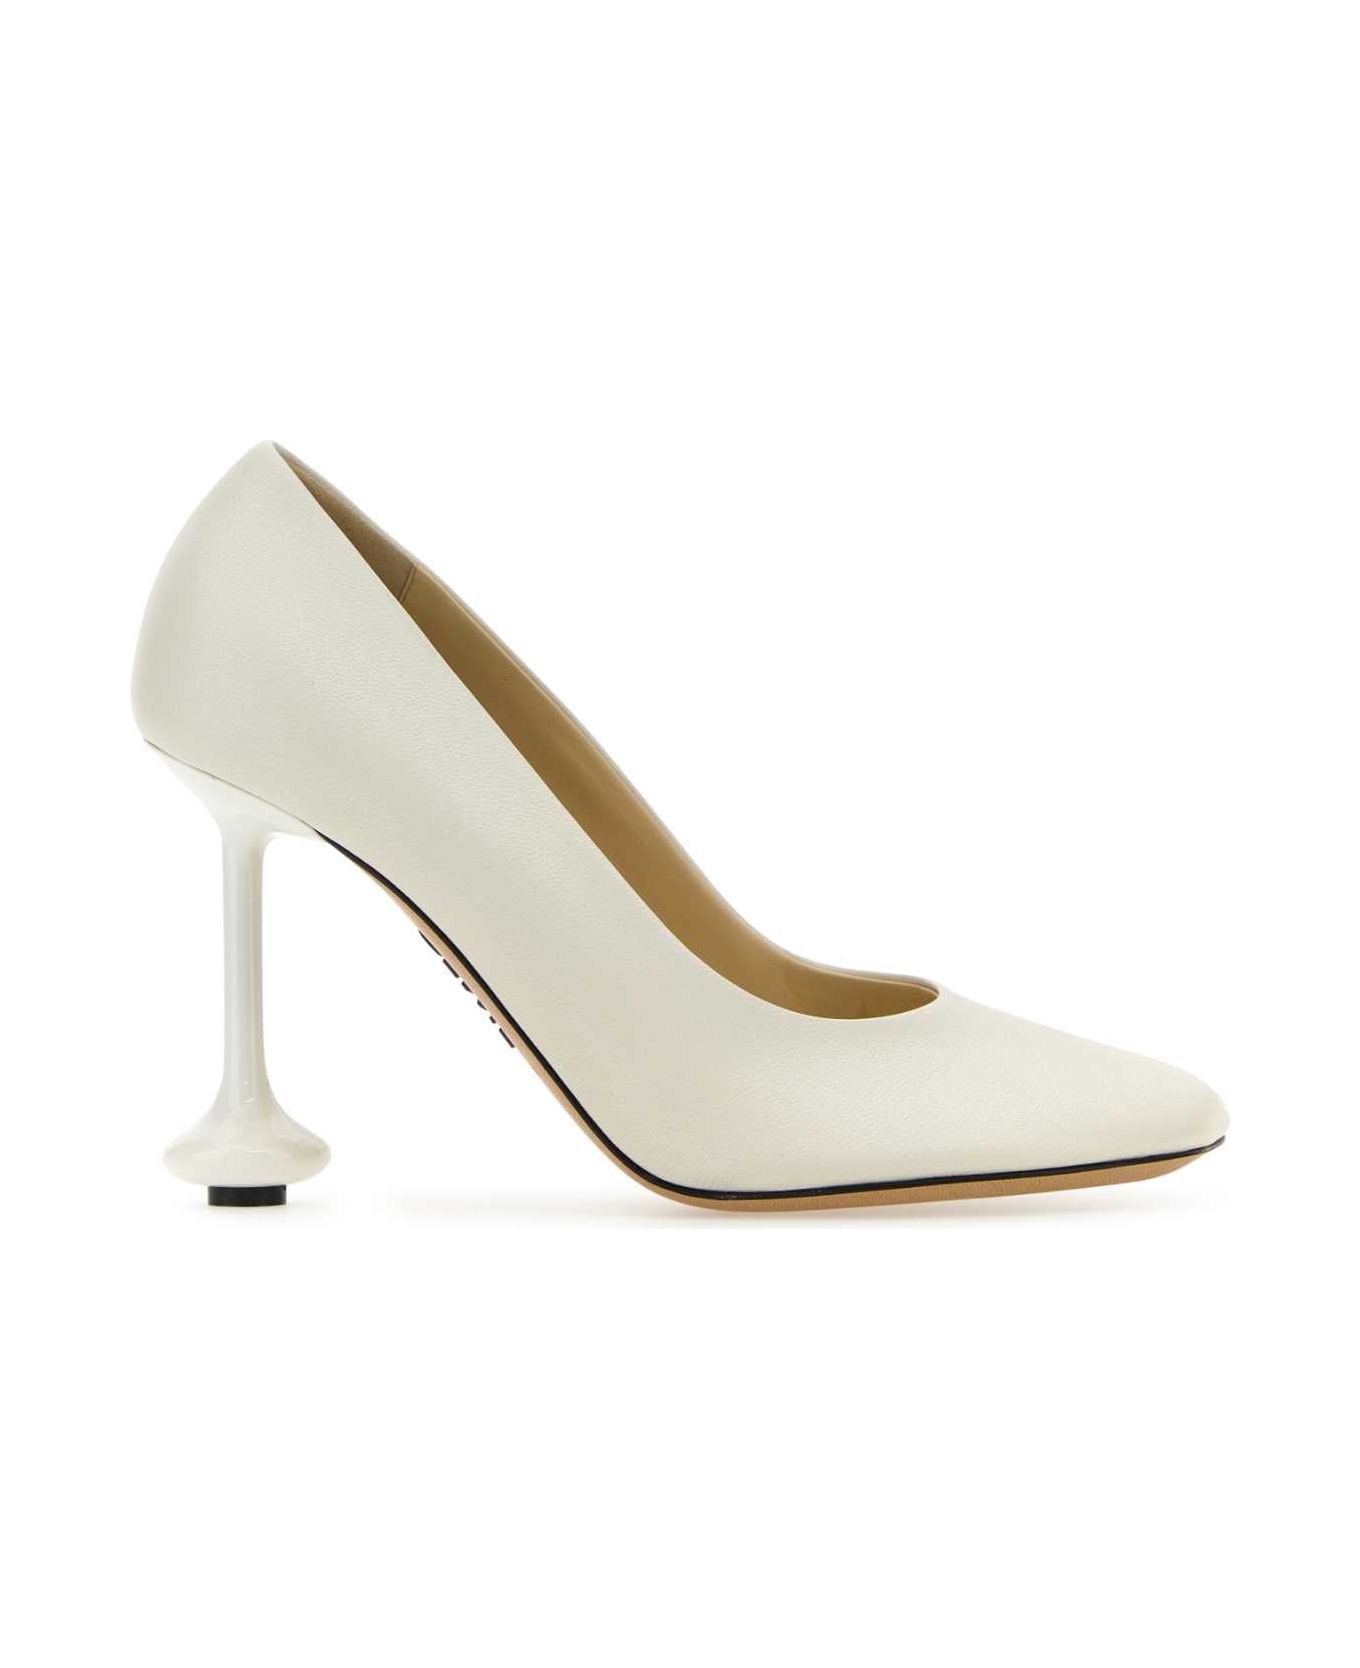 Loewe Ivory Leather Toy Pumps - WHITE